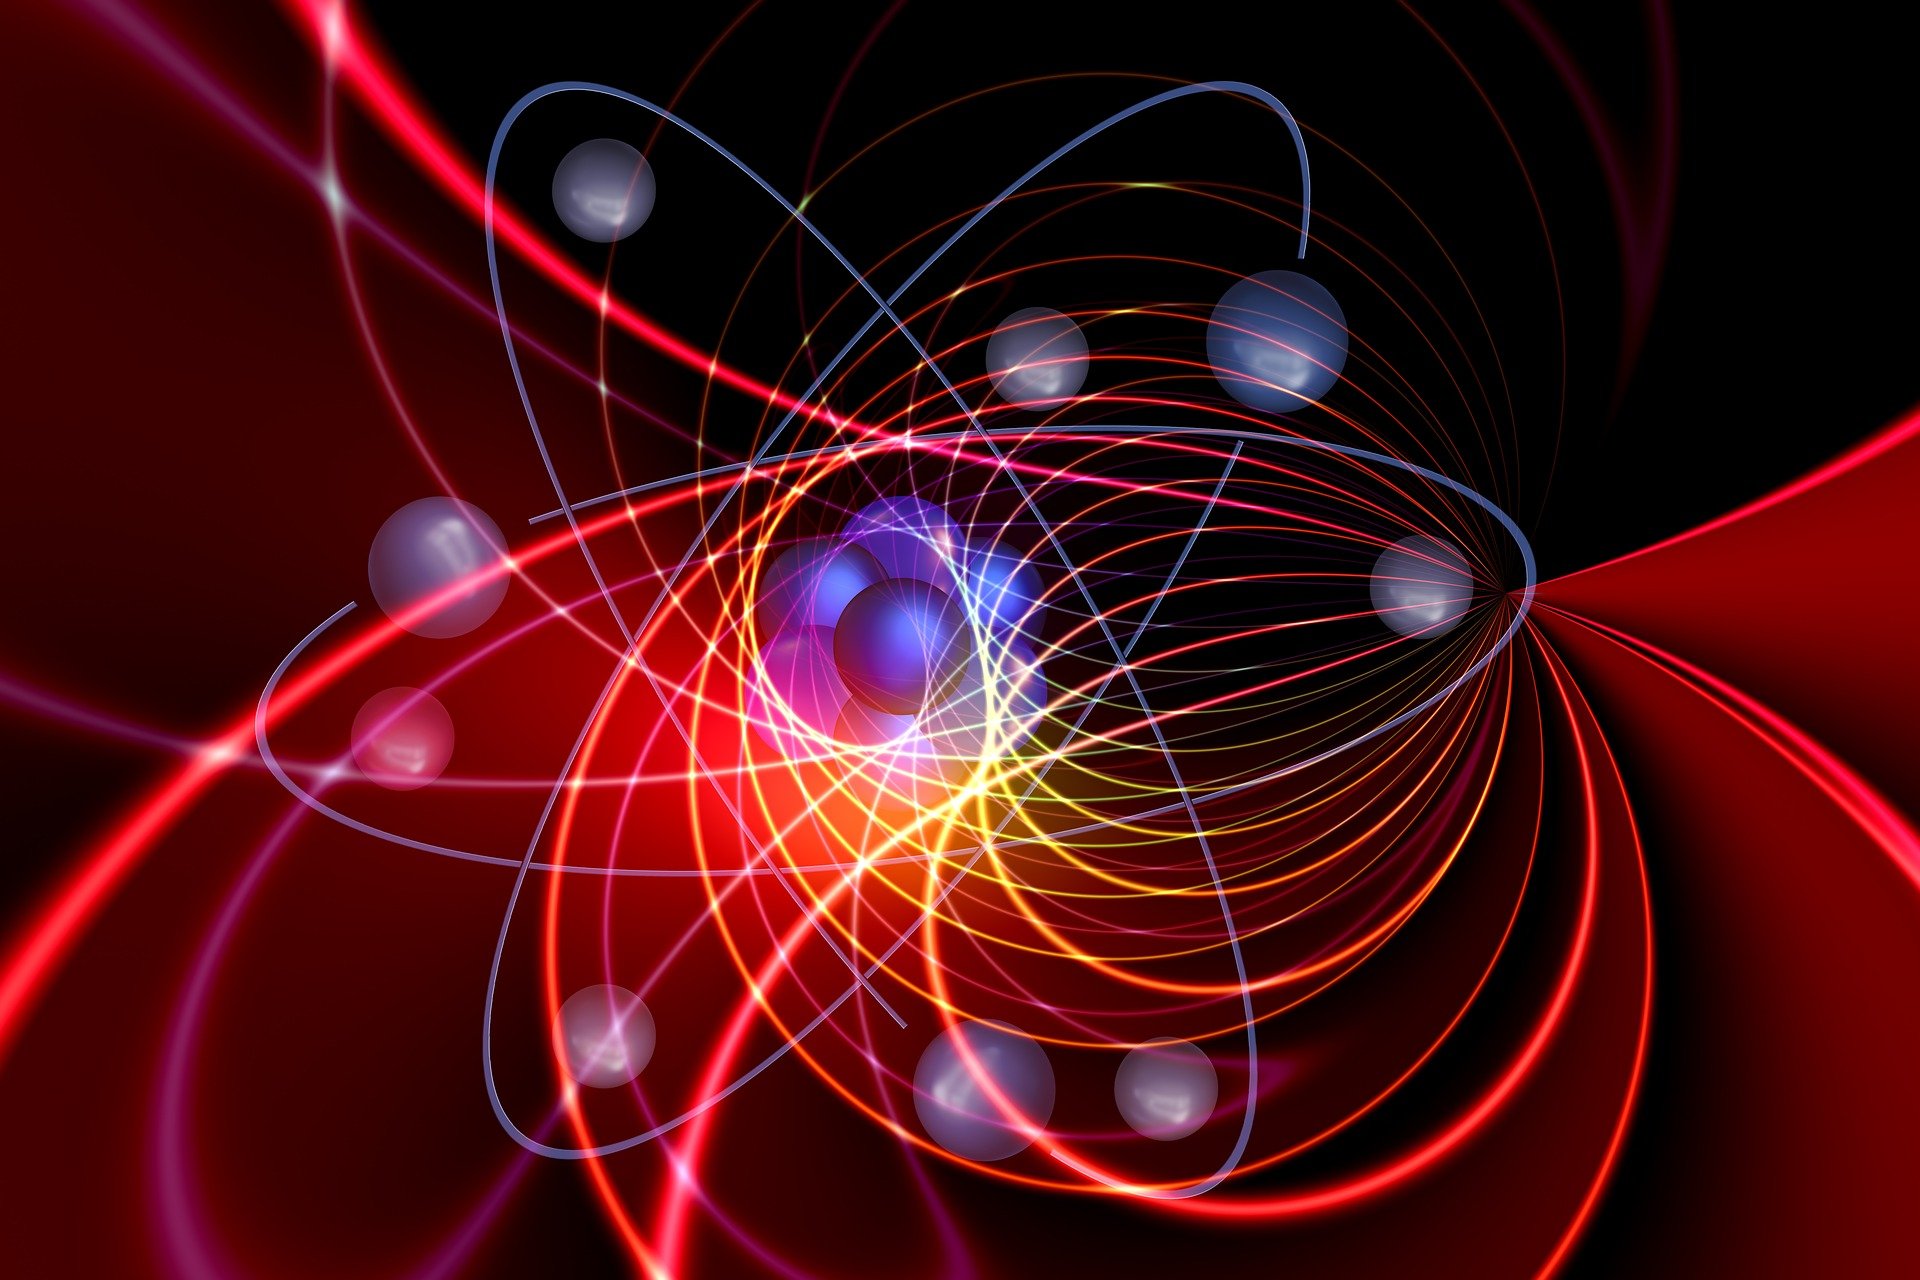 Matter From Light. Physicists Create Matter and Antimatter by Colliding Just Photons.